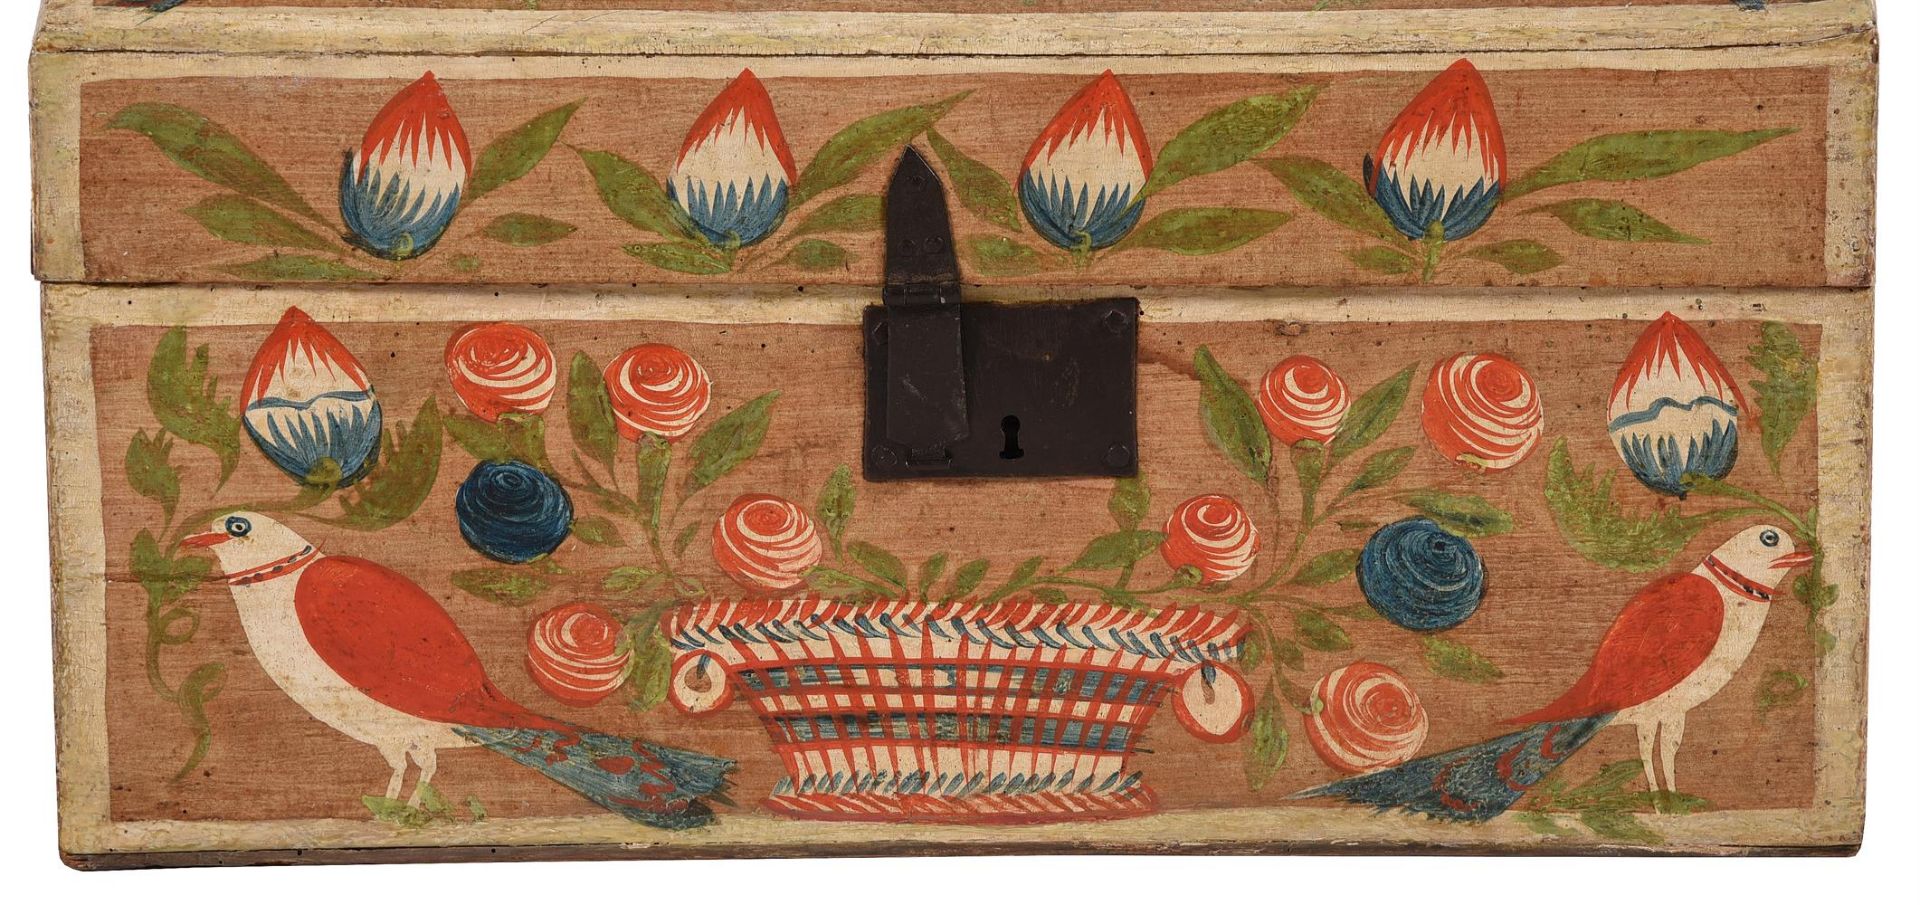 A FRENCH POLYCHROME PAINTED POPLAR MARRIAGE CHEST, LATE 18TH OR EARLY 19TH CENTURY - Image 3 of 4